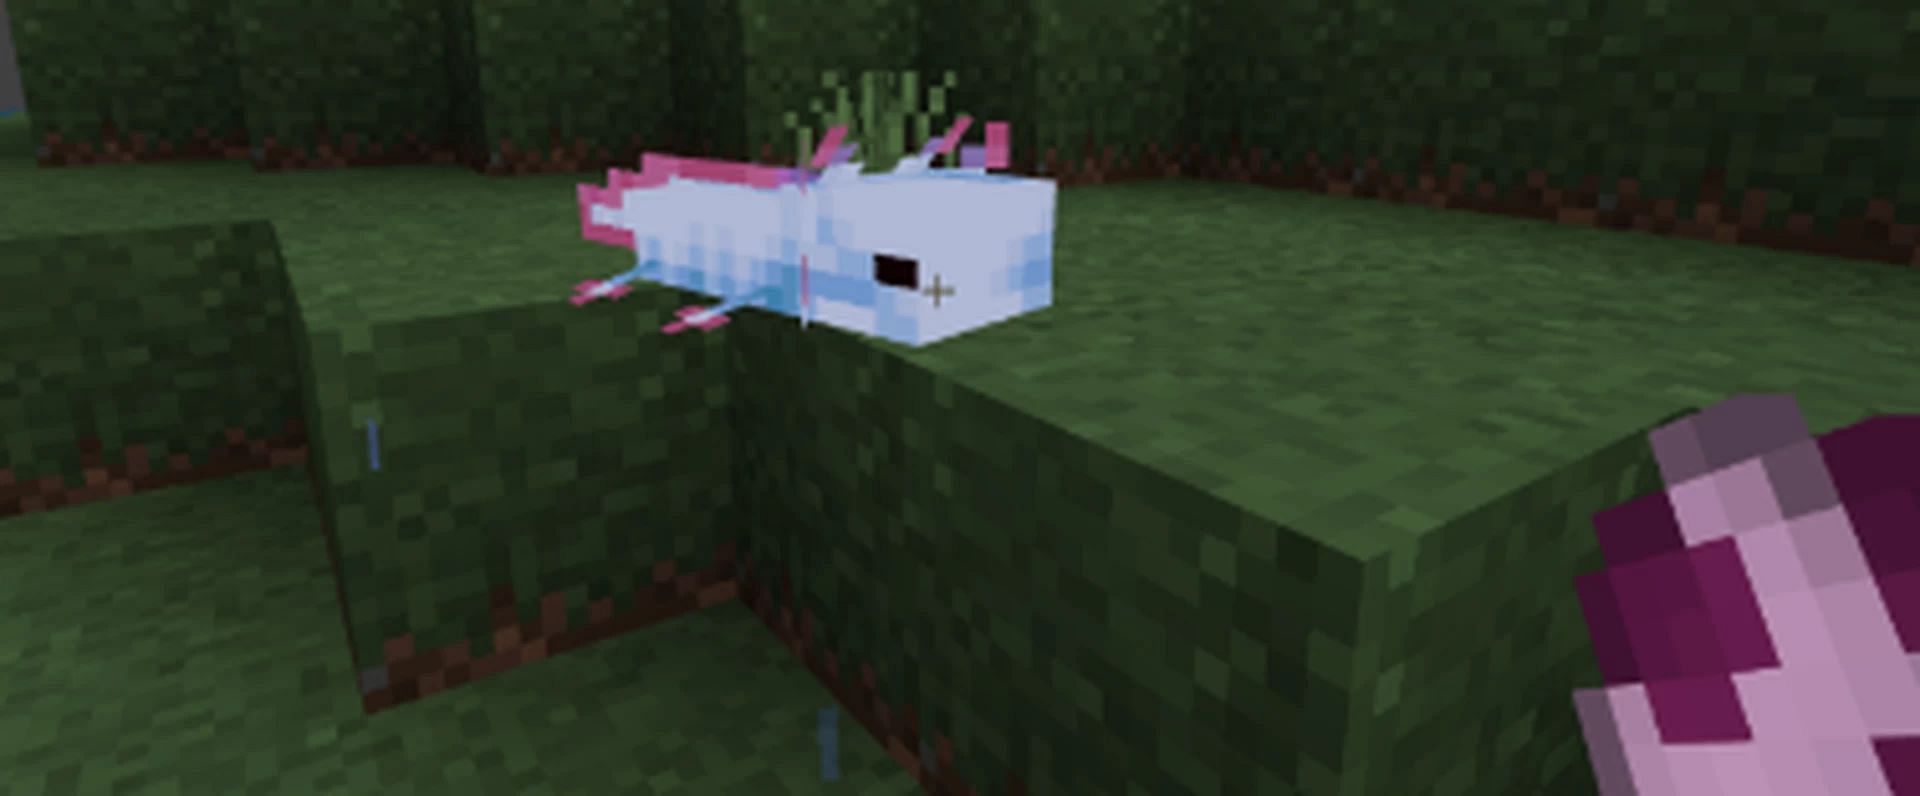 This pack simply improves the existing look of vanilla axolotls (Image via Trolero7608/PlanetMinecraft)